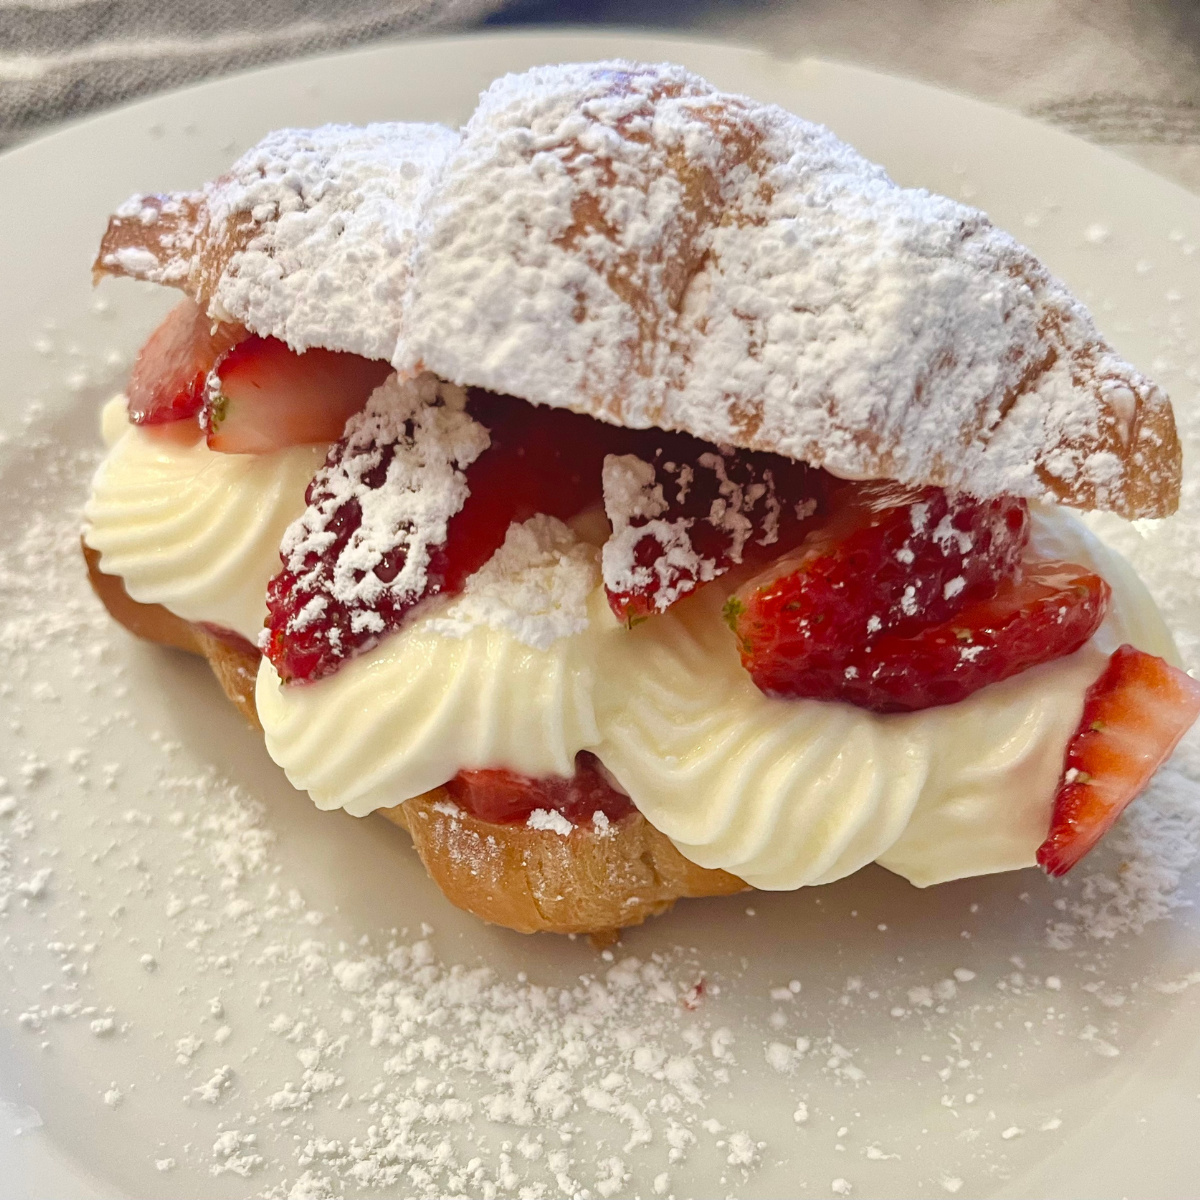 A Strawberry Croissant with cream filling on a white plate